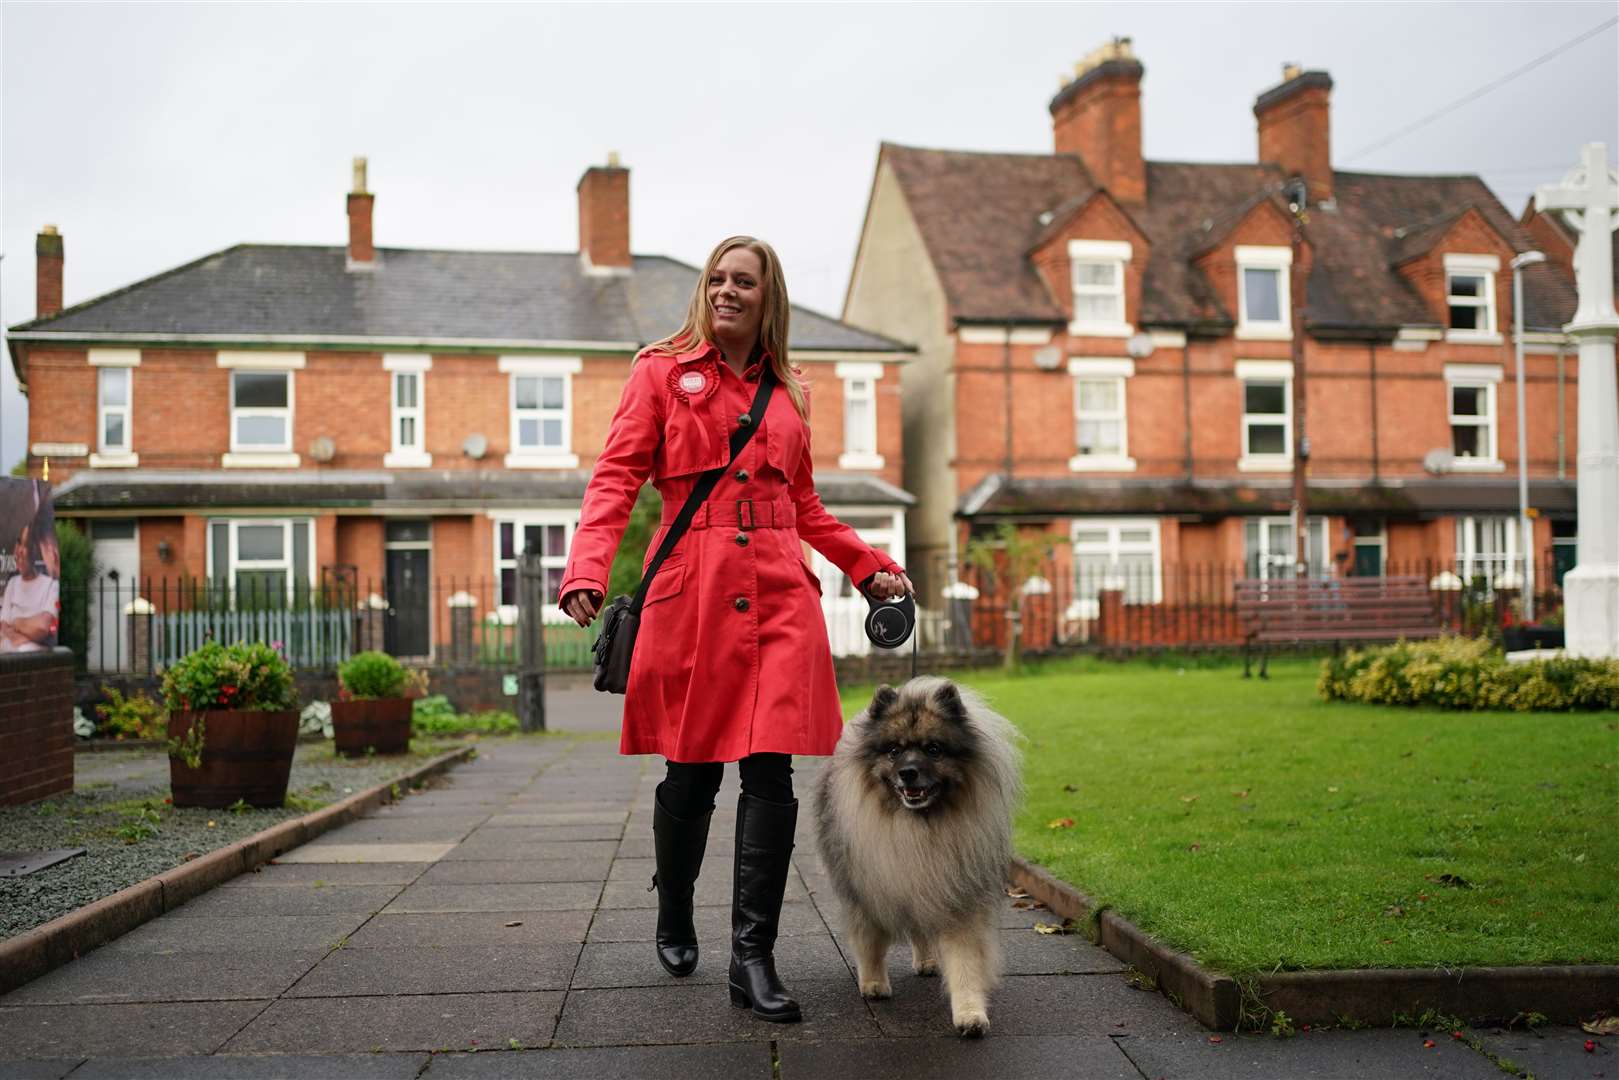 Labour candidate Sarah Edwards arrives with her dog Poykee to cast her vote (Jacob King/PA)